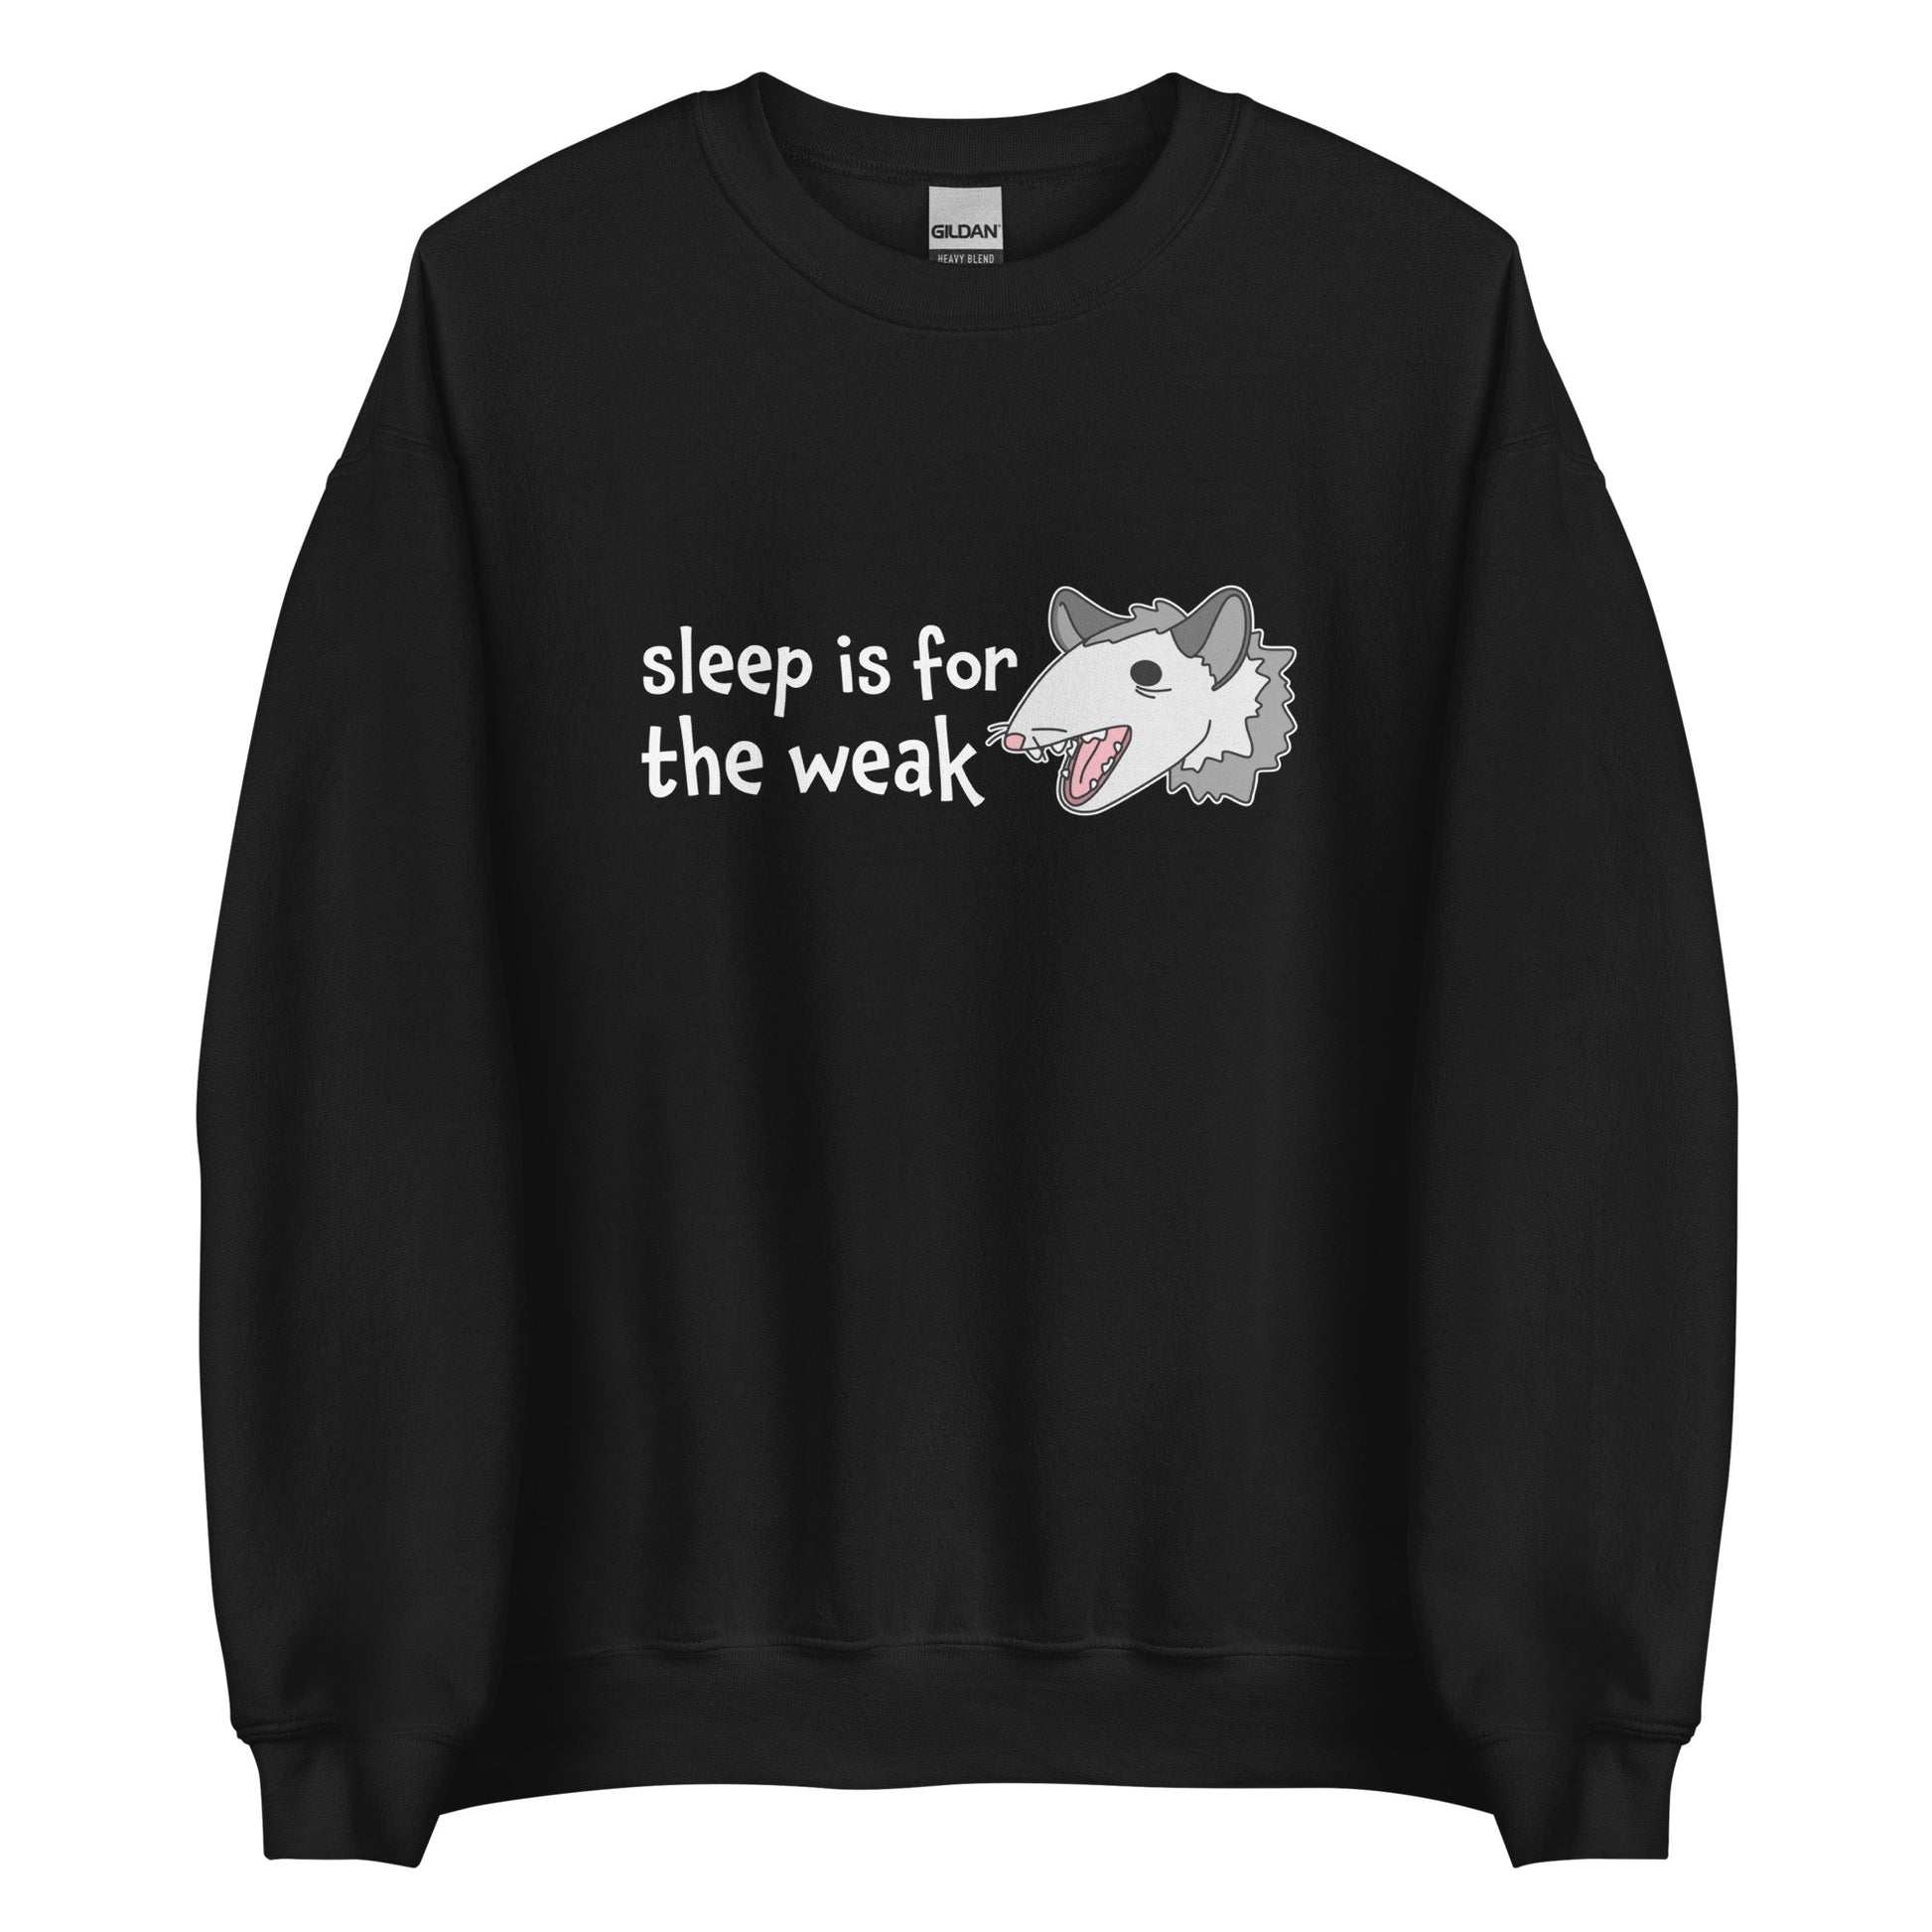 A black crewneck sweatshirt featuring an illustration of an opossum with its mouth open, as if it was yelling. Text alongside the opossum reads "sleep is for the weak"